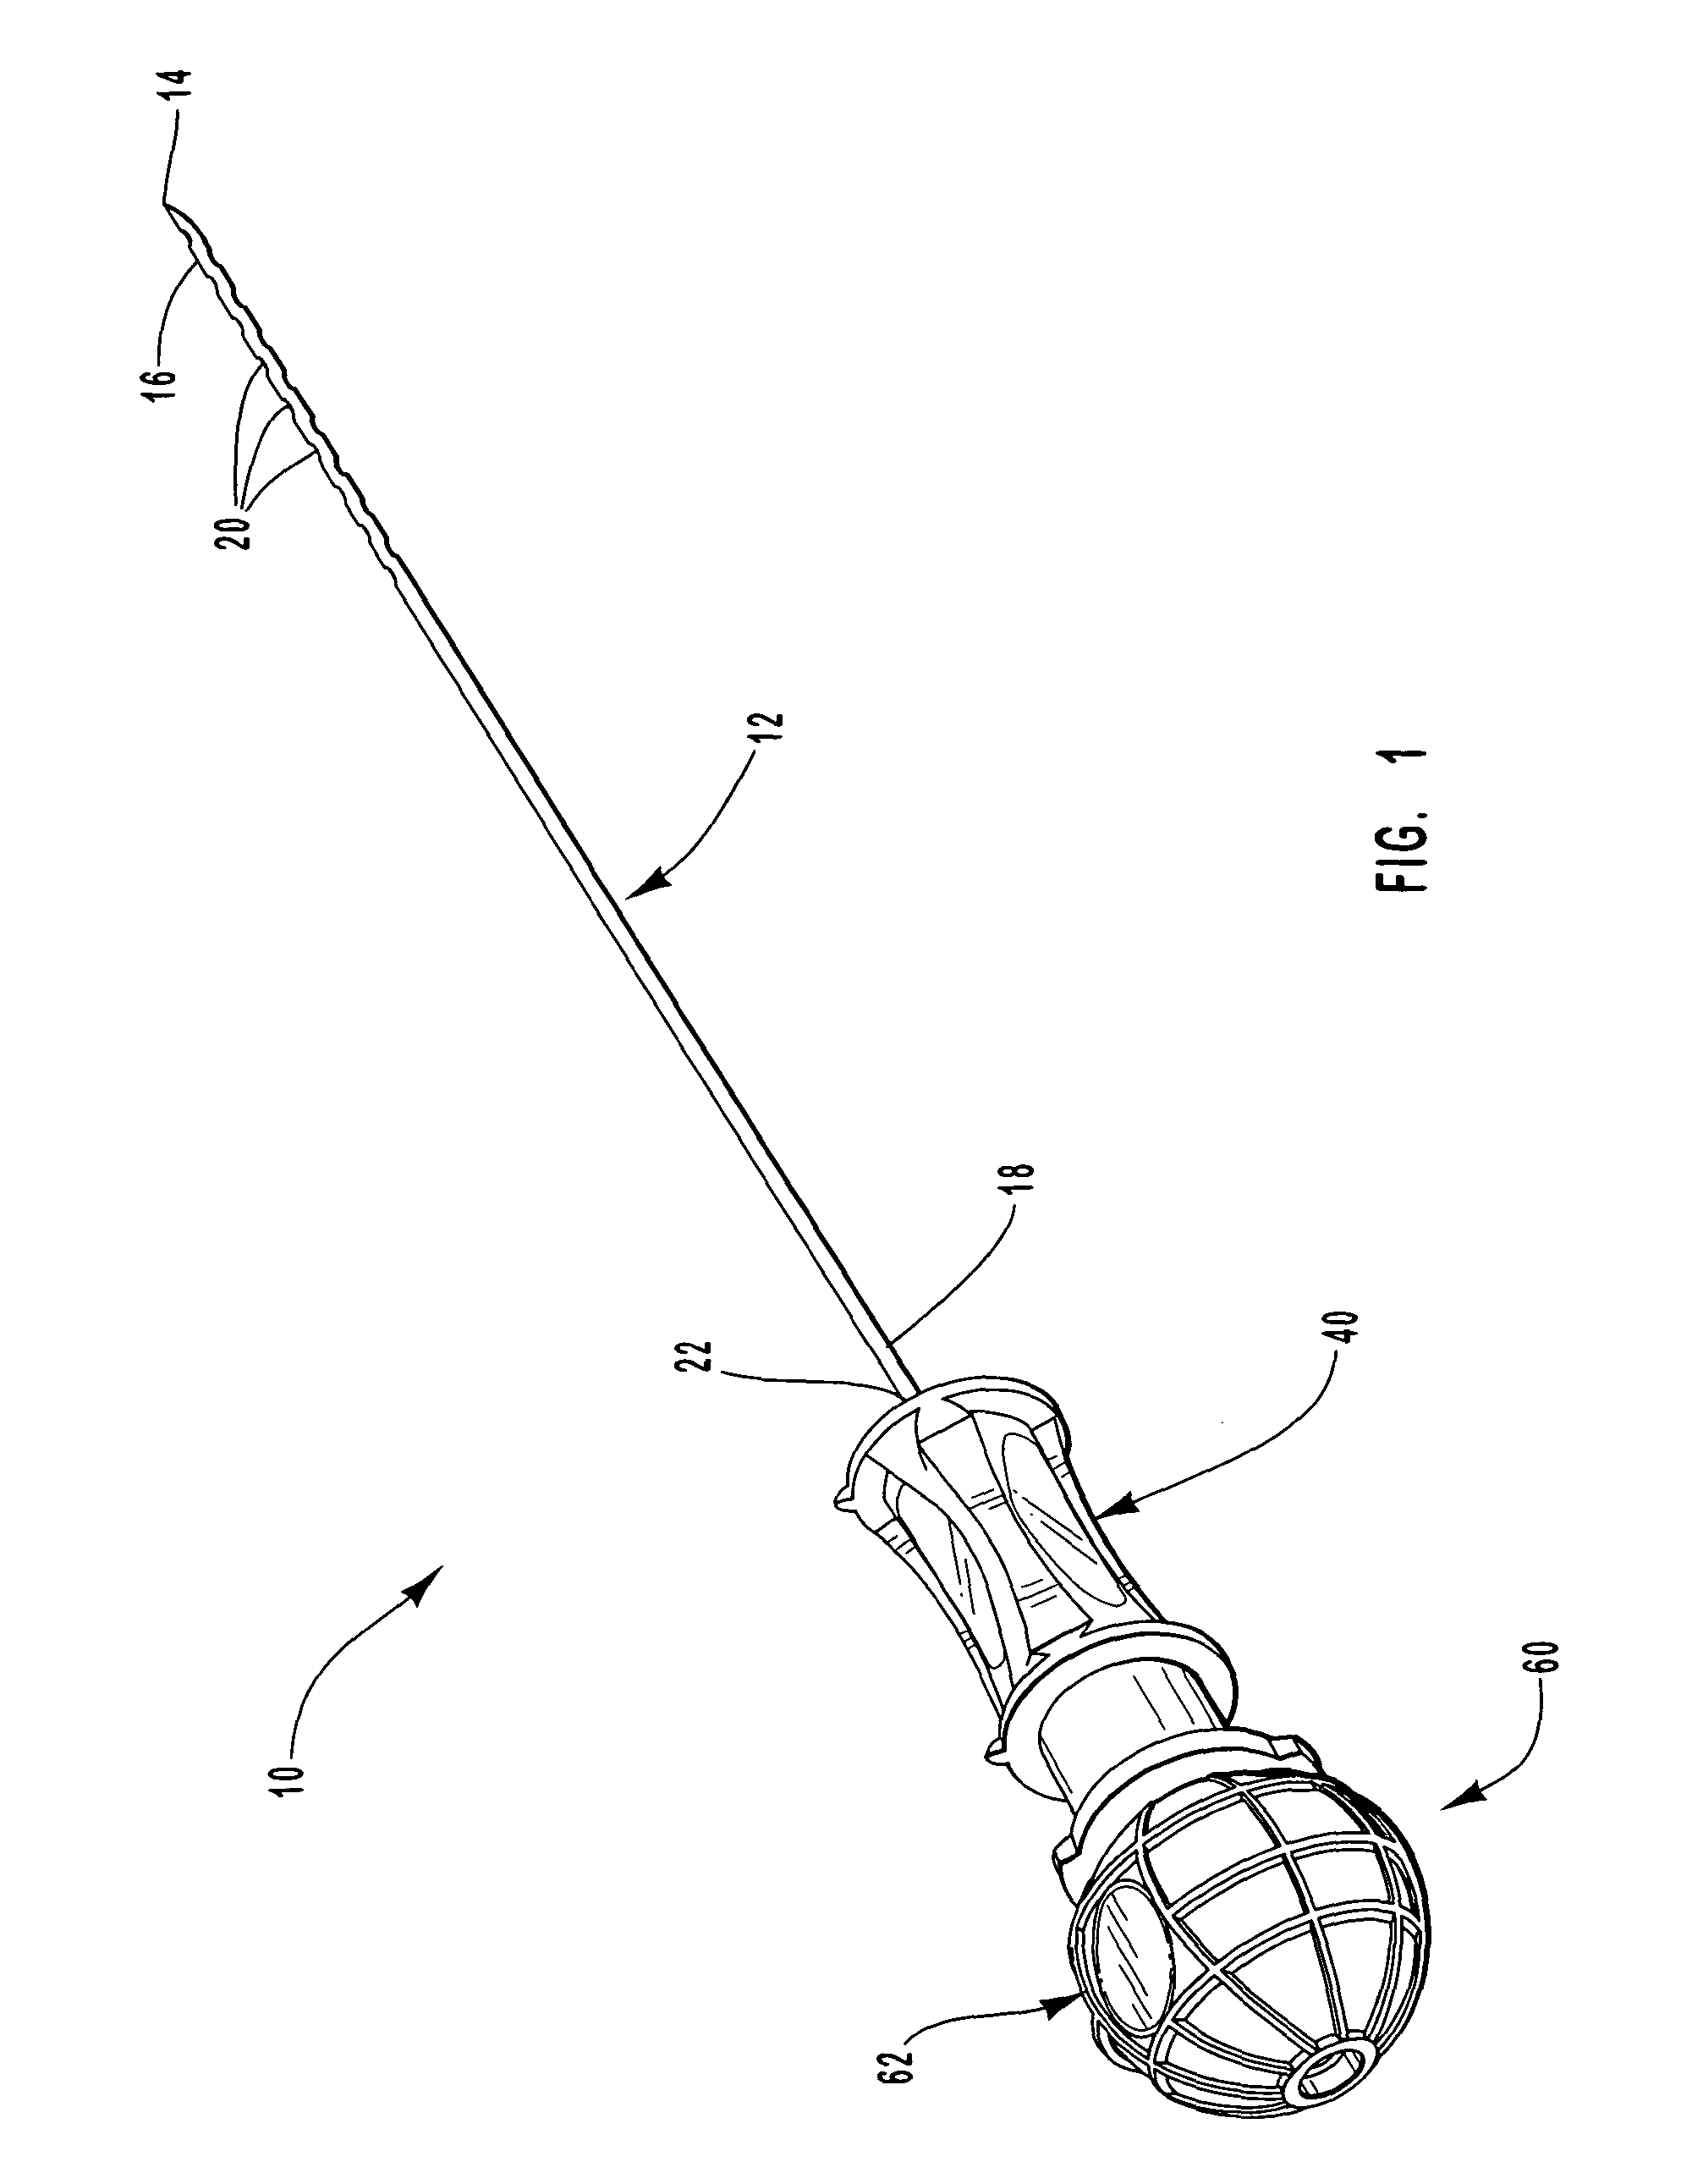 Fenestrated peripheral nerve block needle and method for using the same